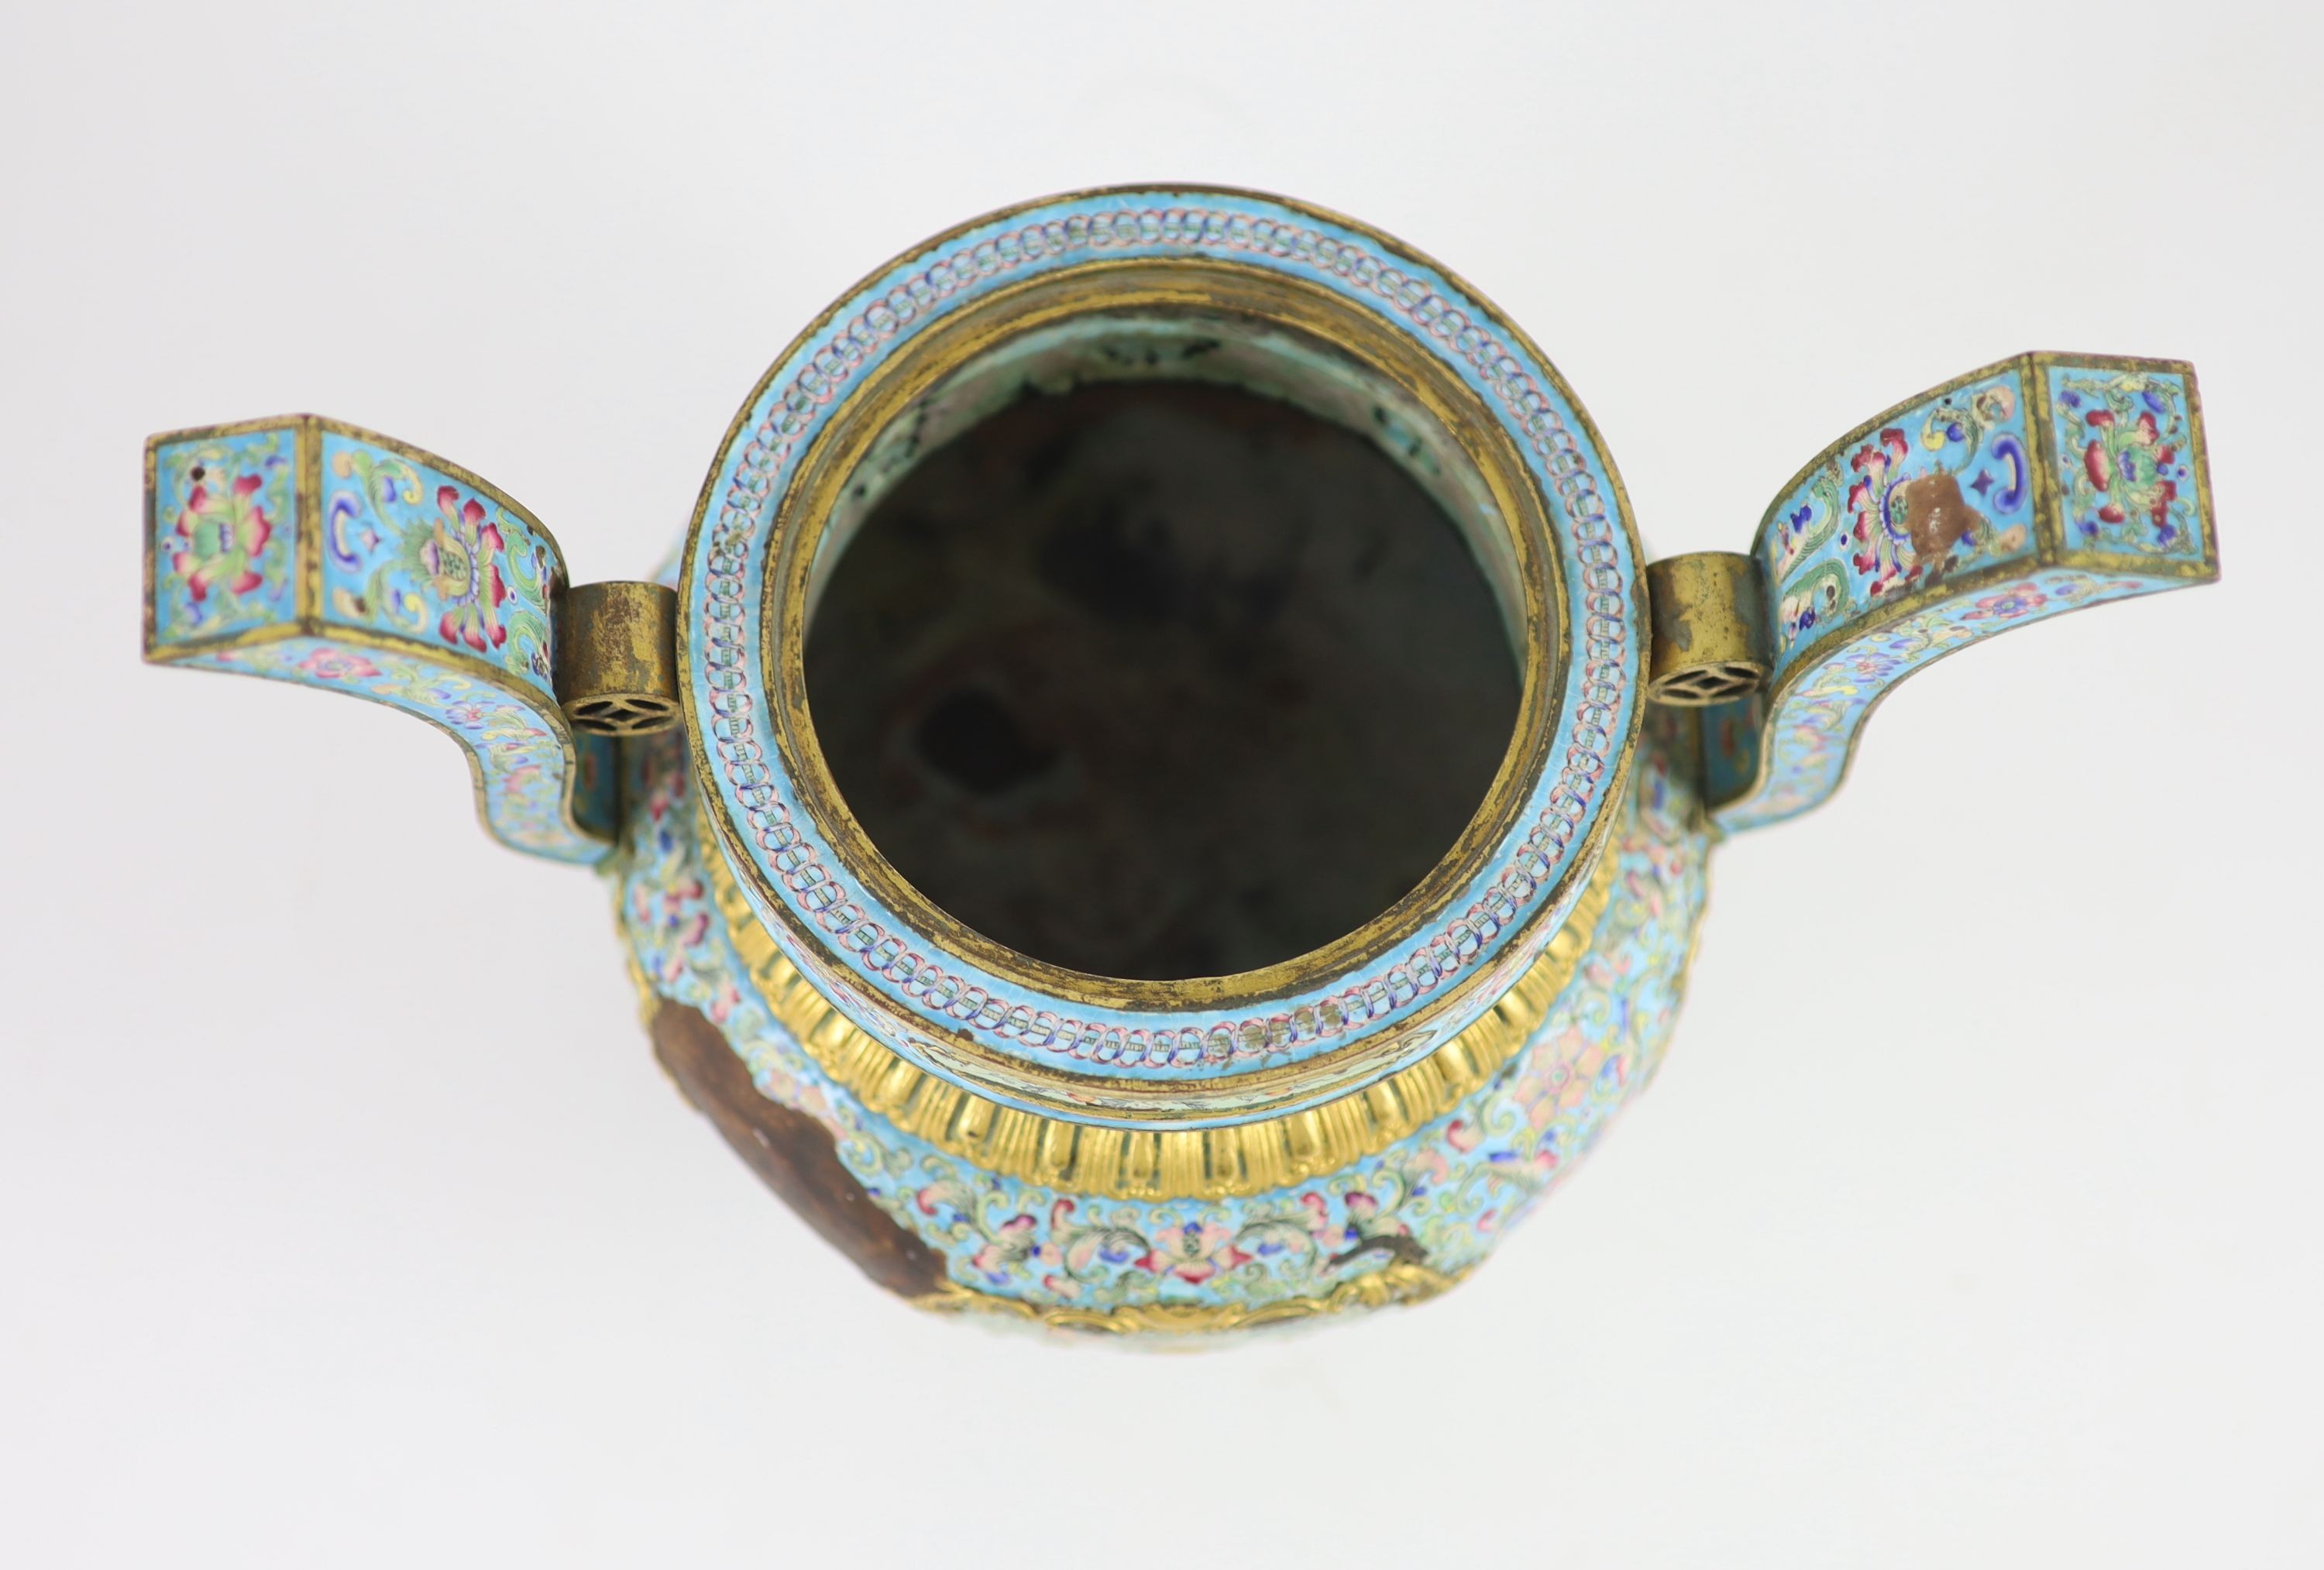 A Chinese Canton enamel tripod censer, Qianlong mark and period (1736-95), 22.5 cm high, 26 cm wide, losses to enamels